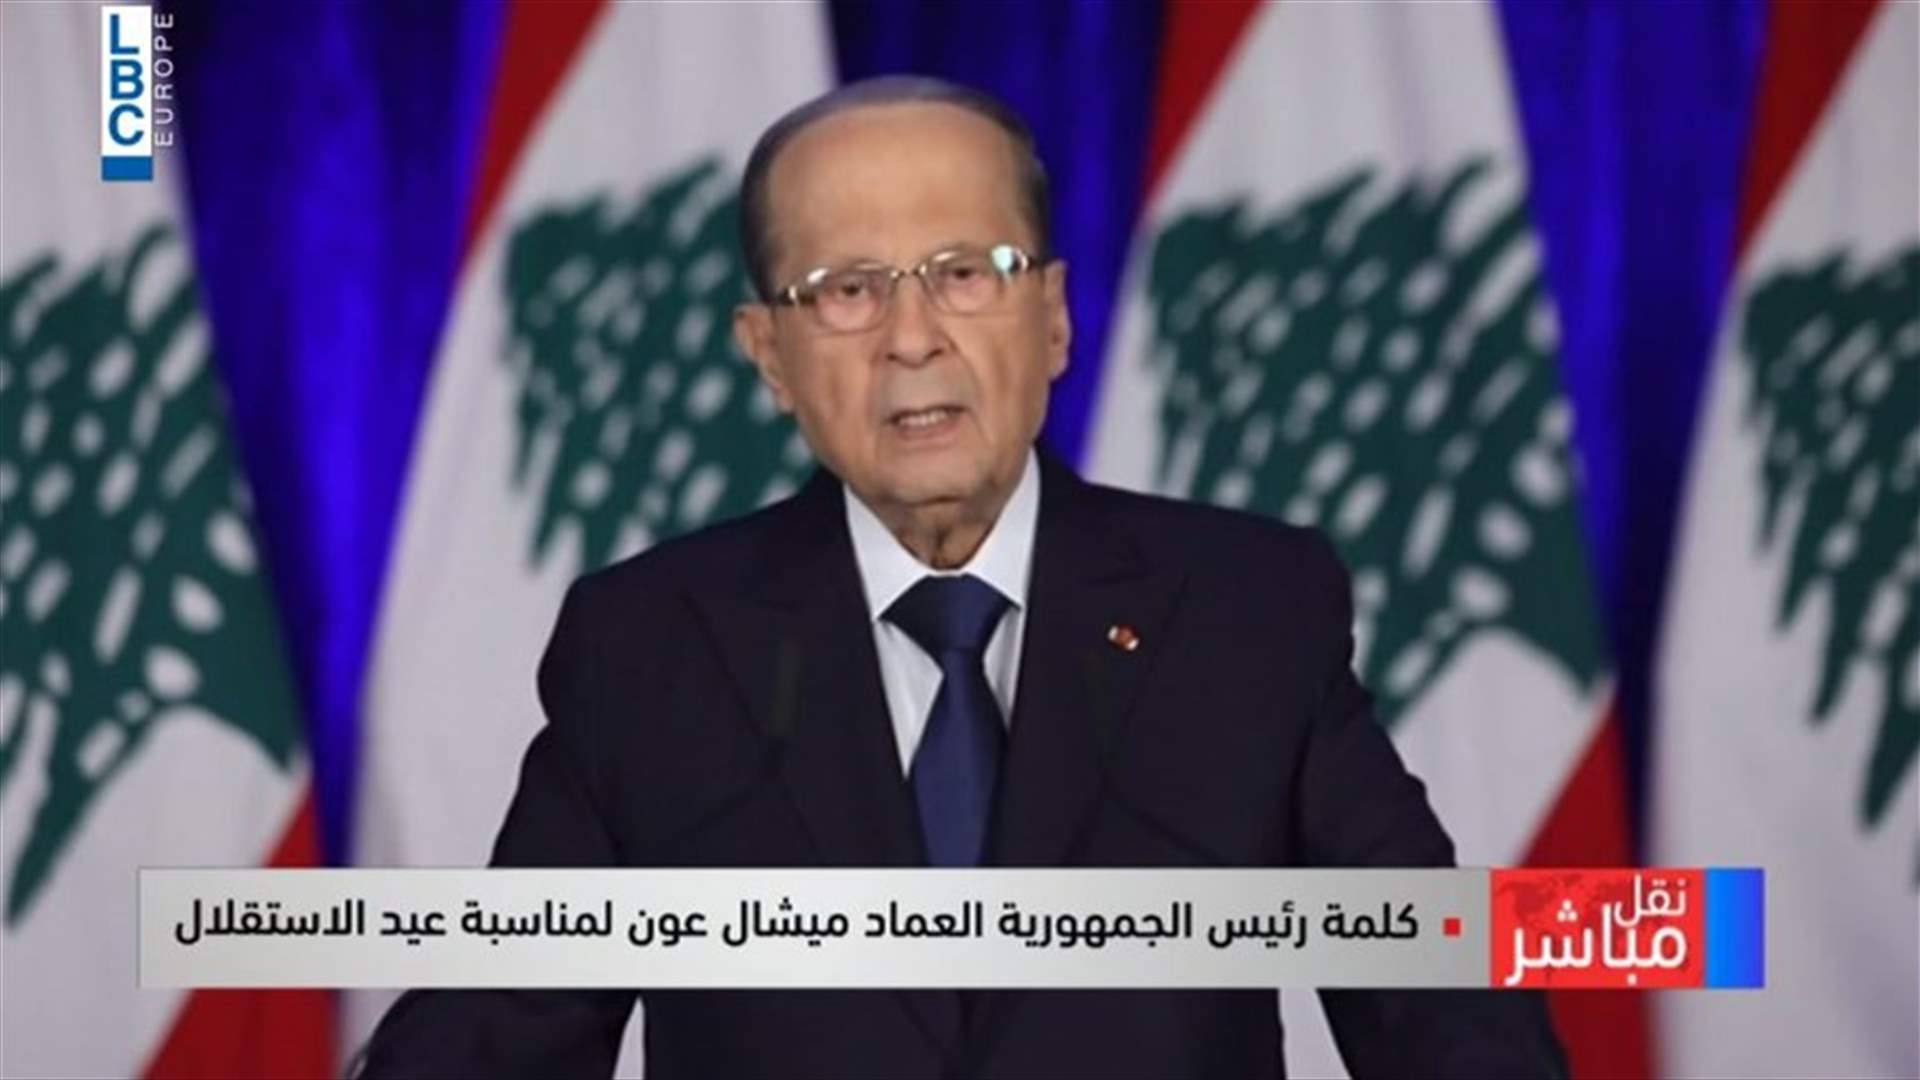 President Aoun: Political conflicts imposed this careful approach to reach a government